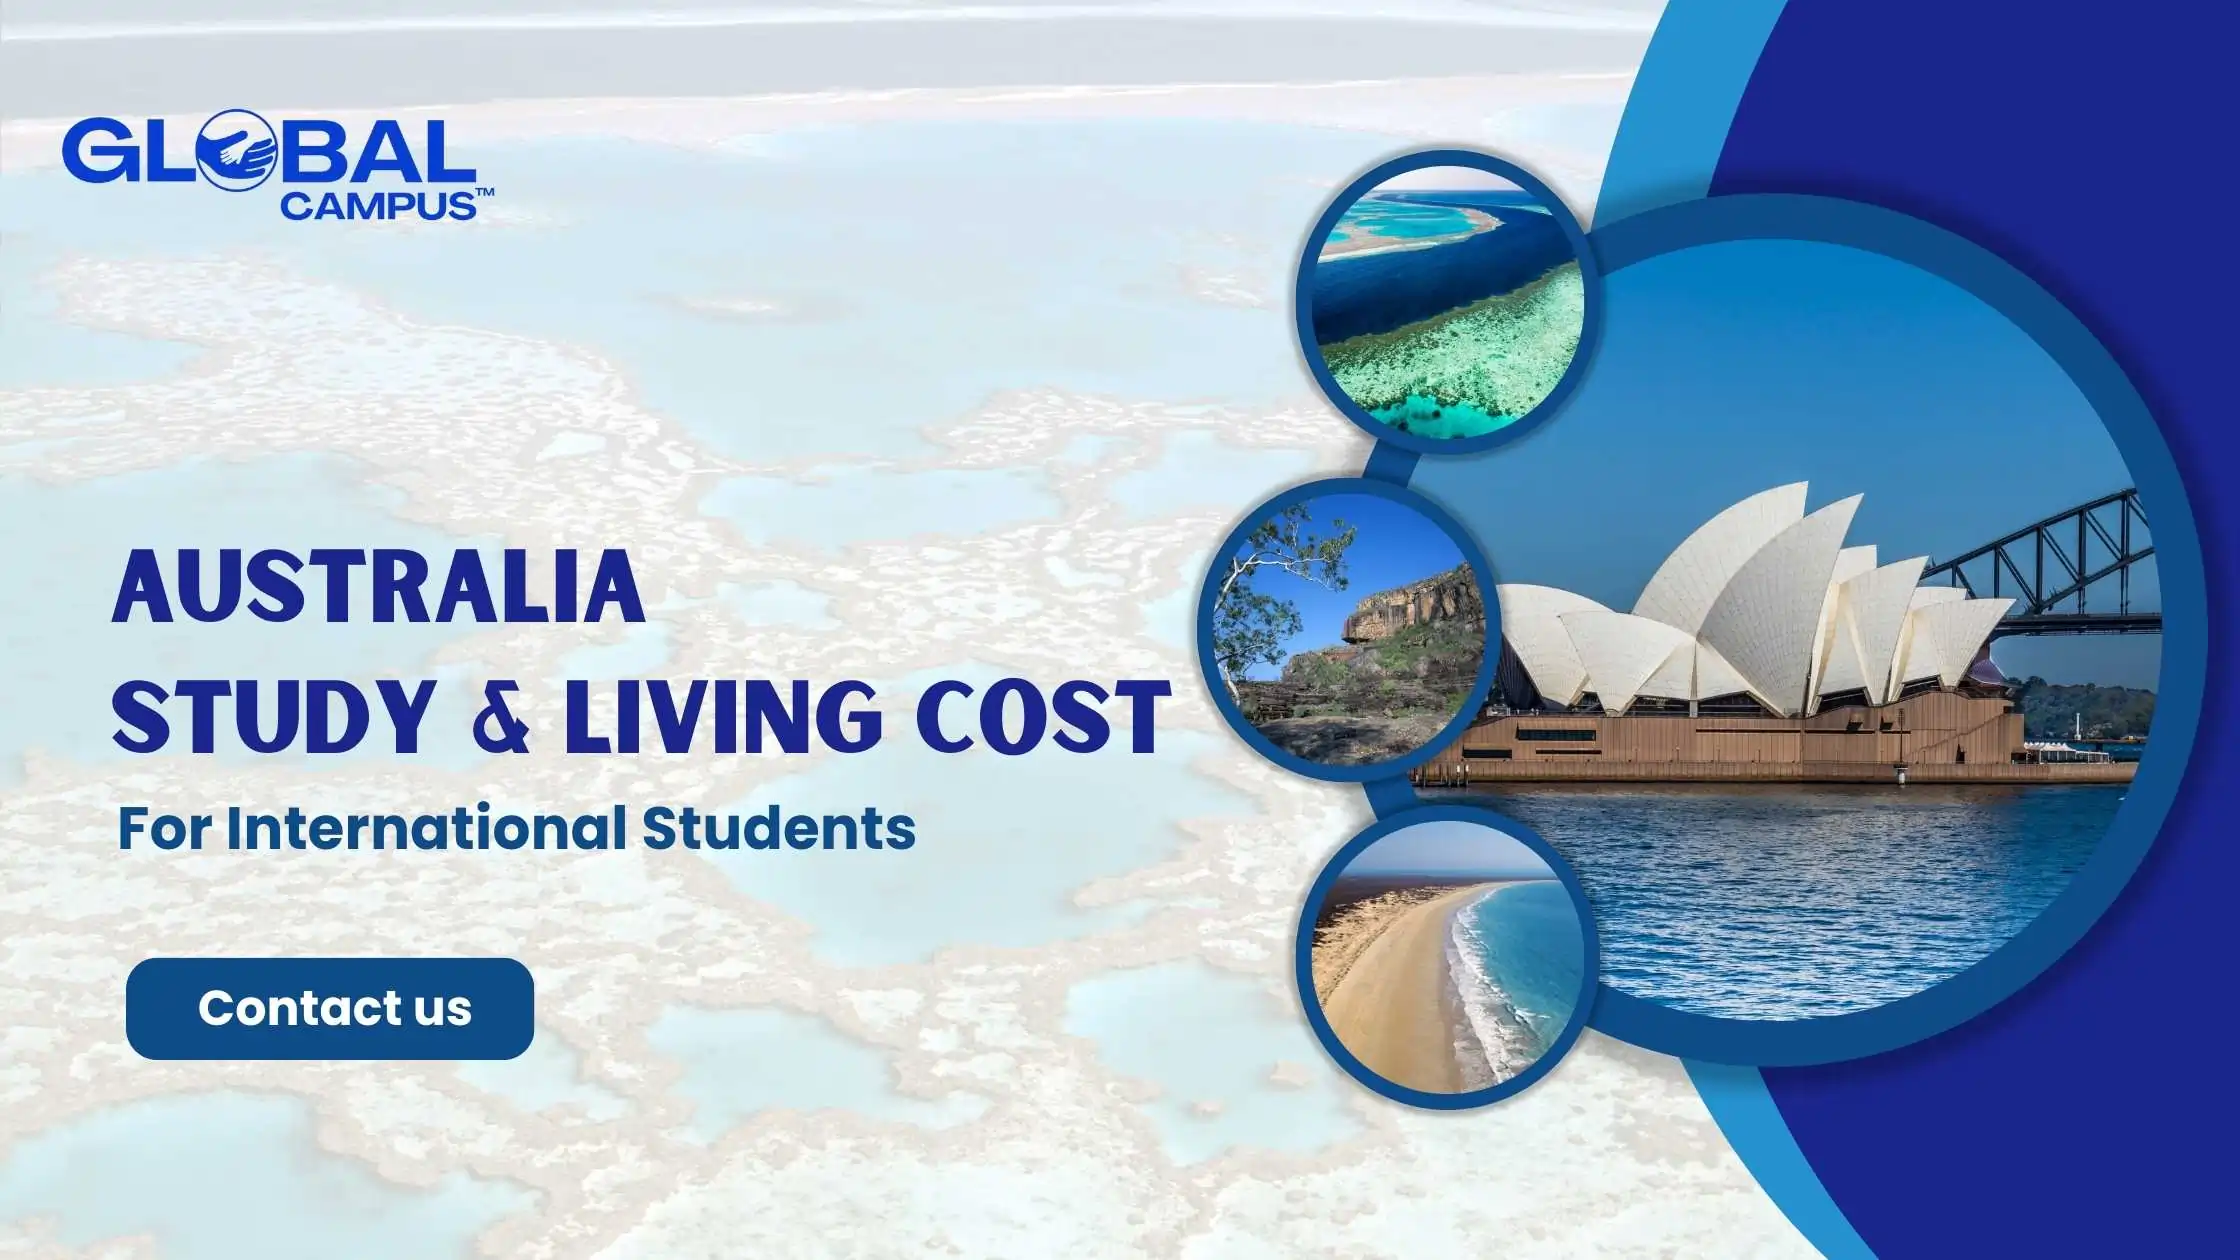 How much does it cost for overseas students to study and live in Australia?